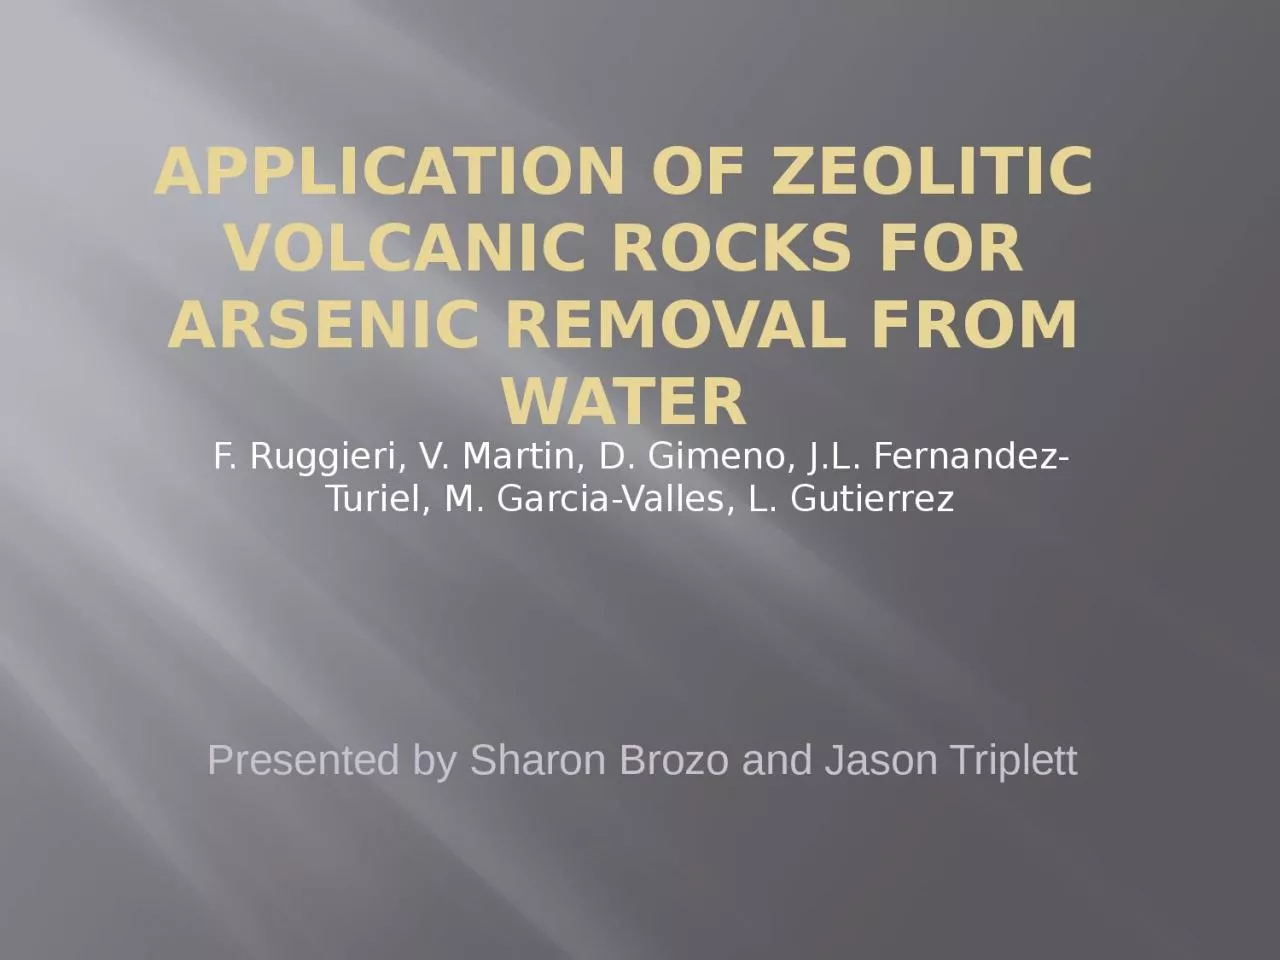 Application of zeolitic volcanic rocks for arsenic removal from water